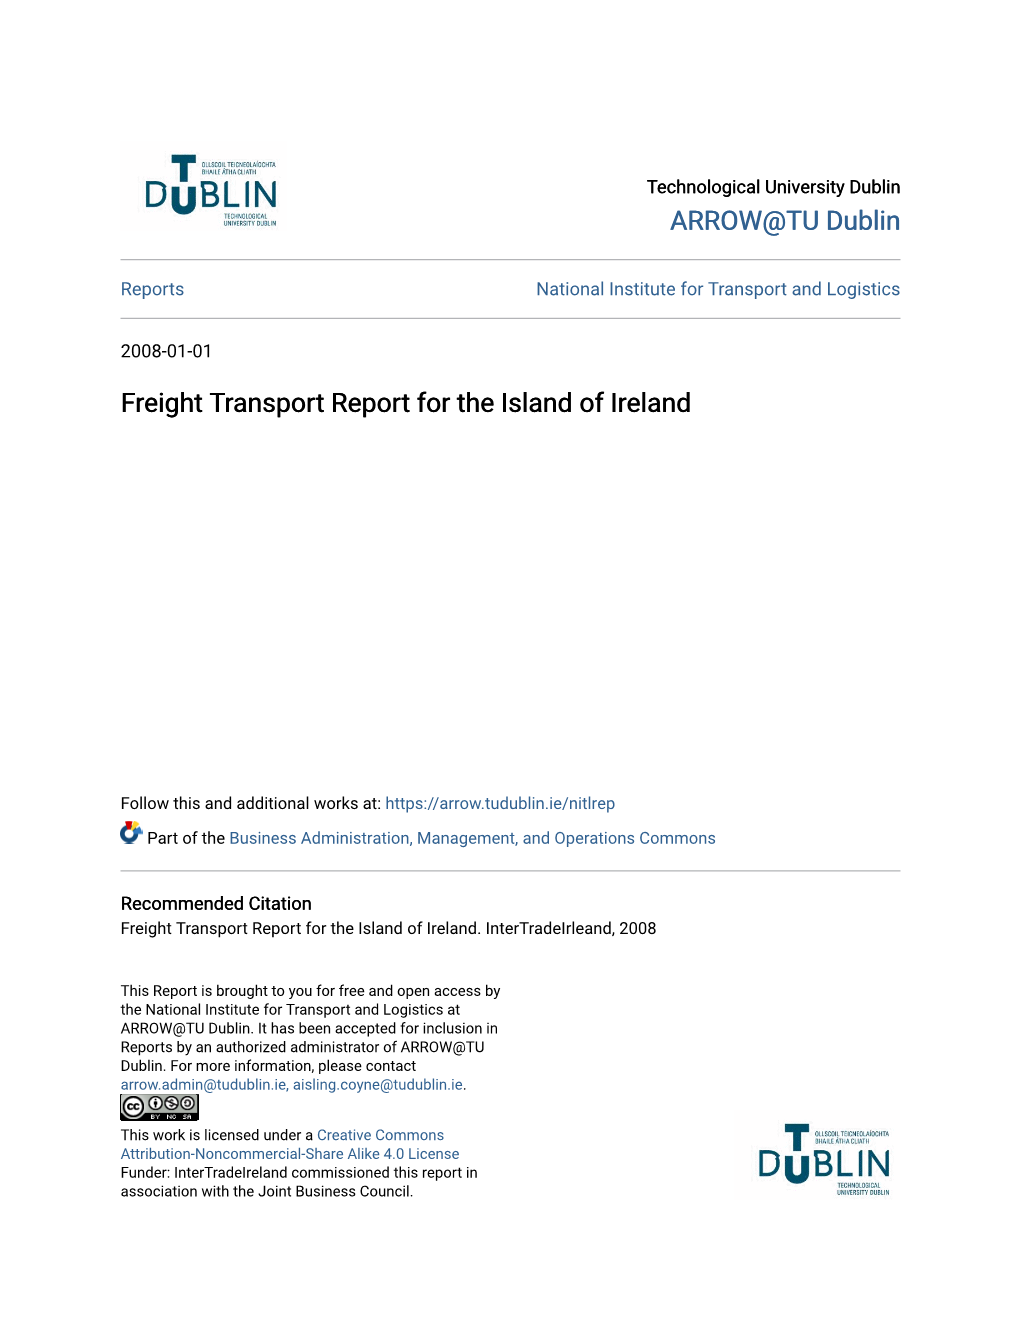 Freight Transport Report for the Island of Ireland